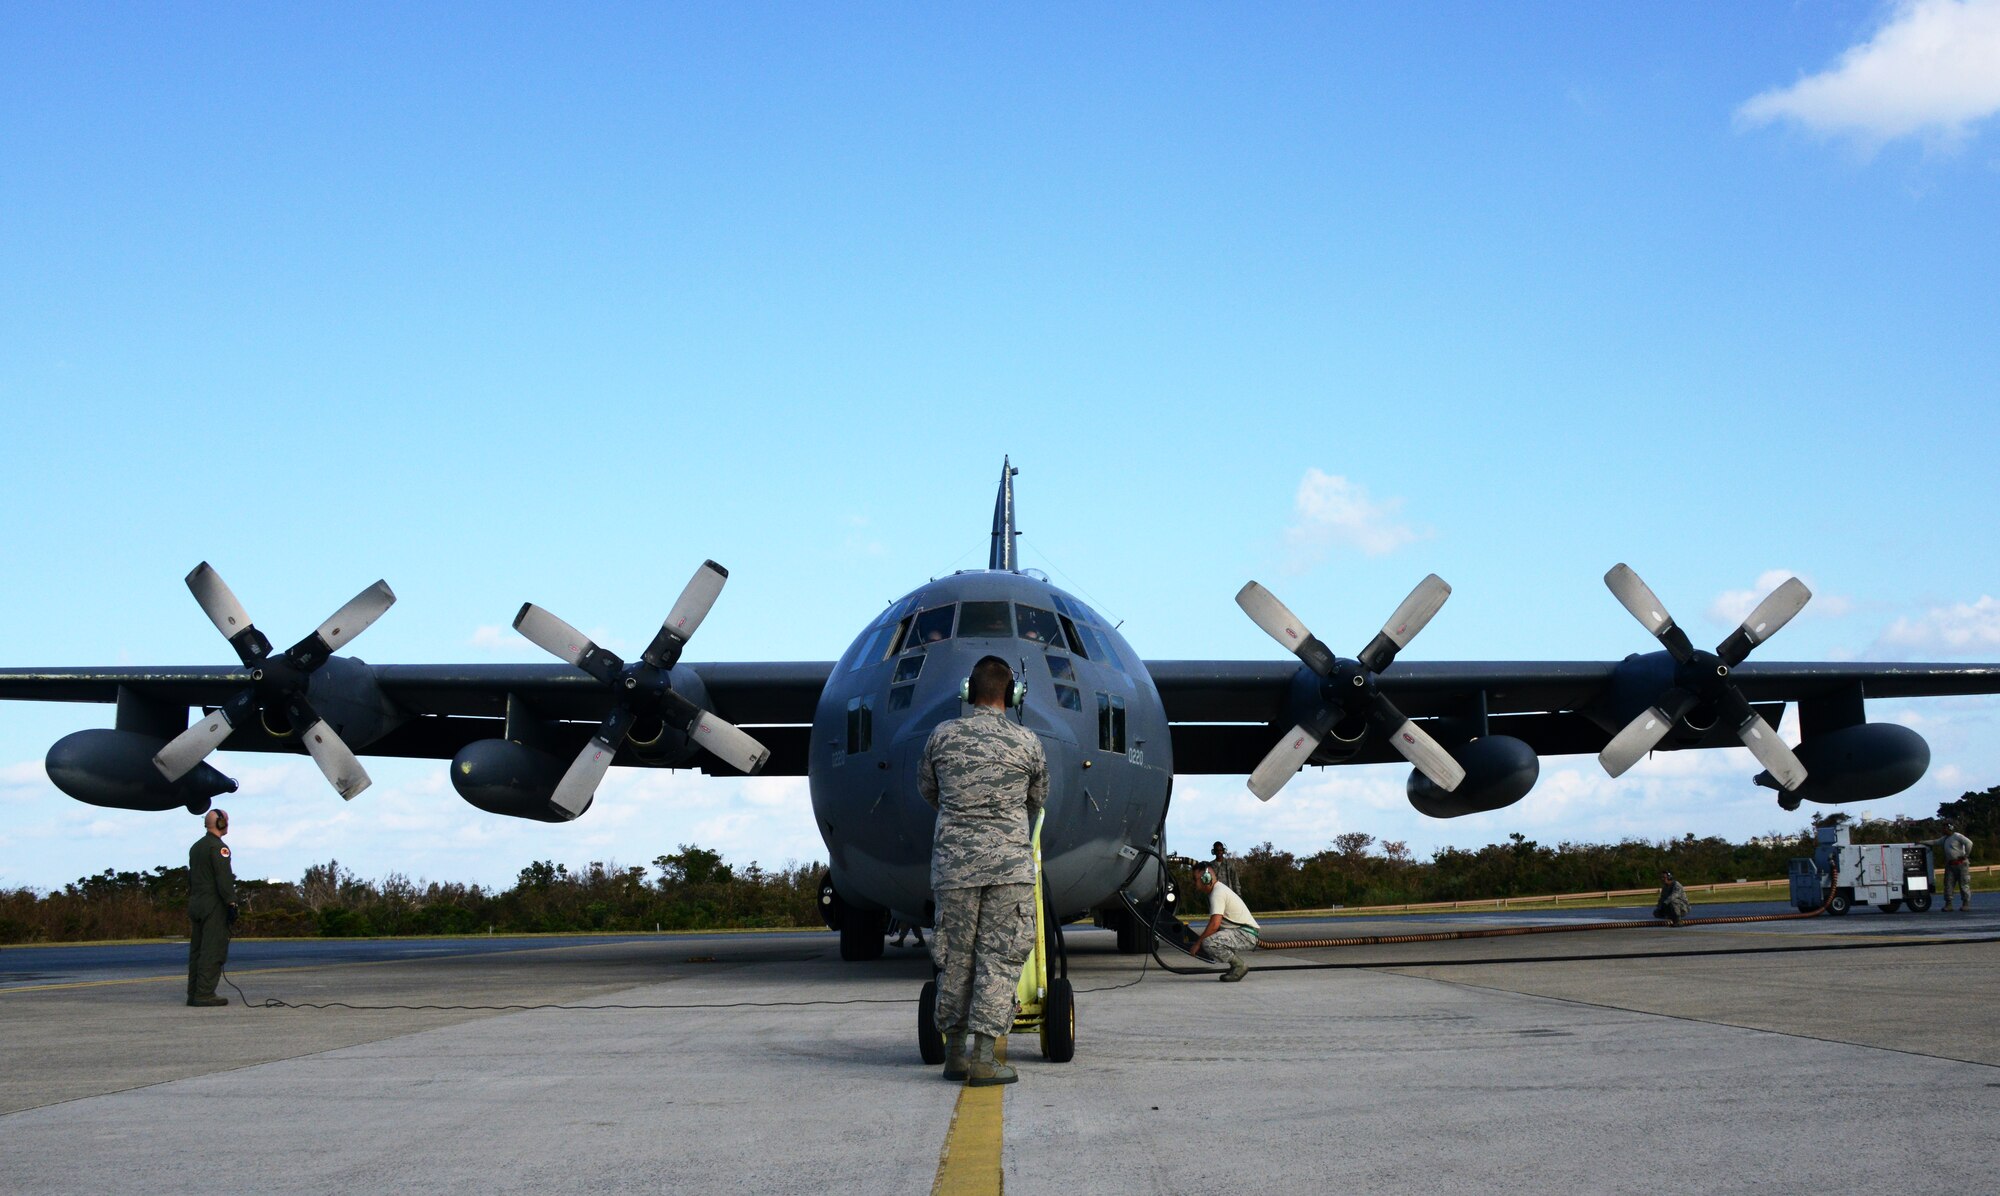 A MC-130P Combat Shadow crew and maintainers prepare to start engines before conducting a 4-ship formation flight Oct. 16, 2014 at Kadena Air Base, Japan.  The formation flight marks the beginning of the retirement for the Combat Shadow in the Pacific, as the unit transitions to the MC-130J Commando II.  (U.S. Air Force photo by Tech. Sgt. Kristine Dreyer)